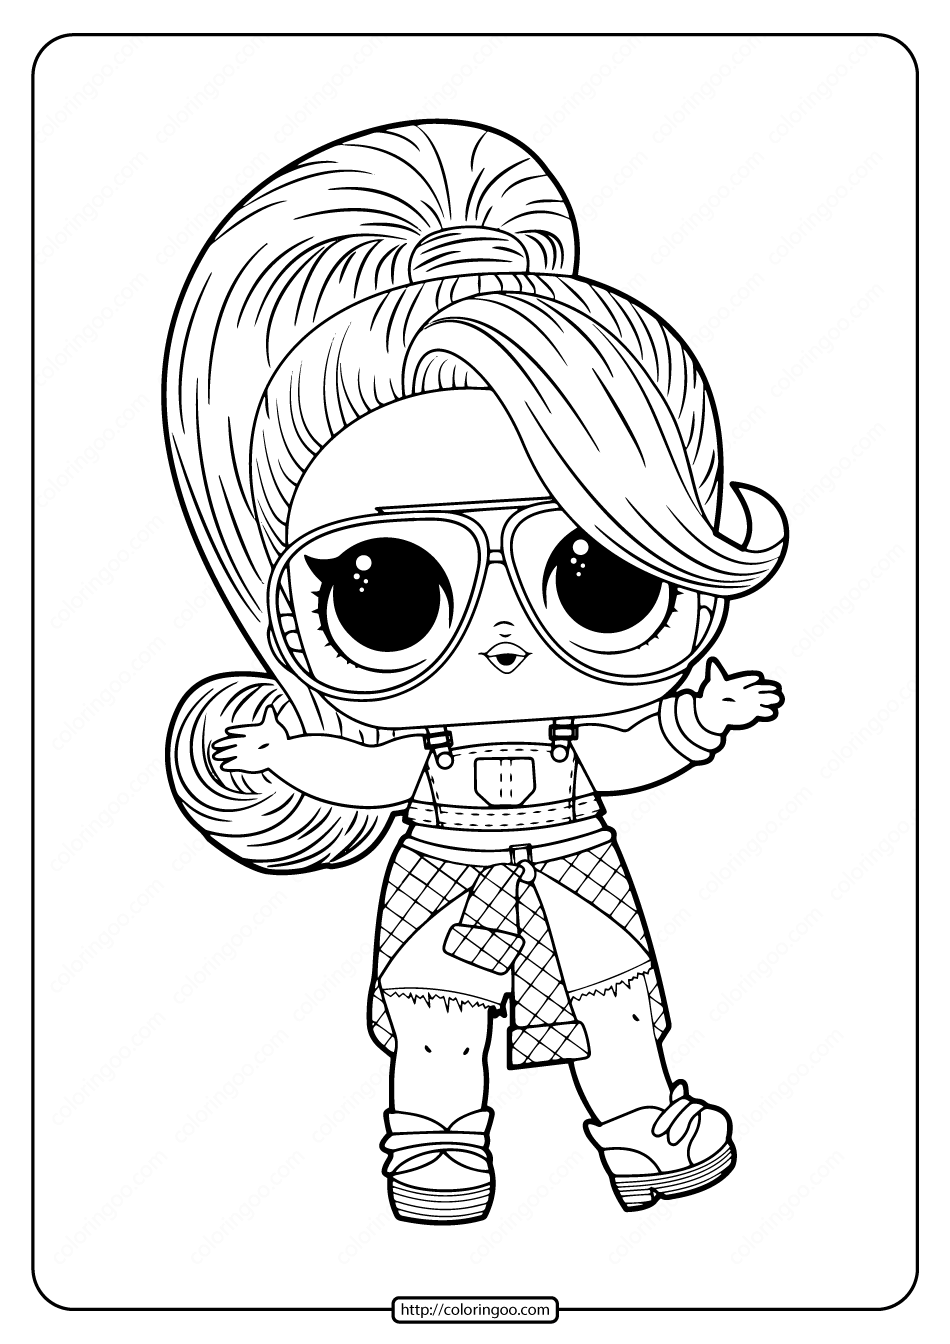 LOL Coloring Pages FREE Printable 160